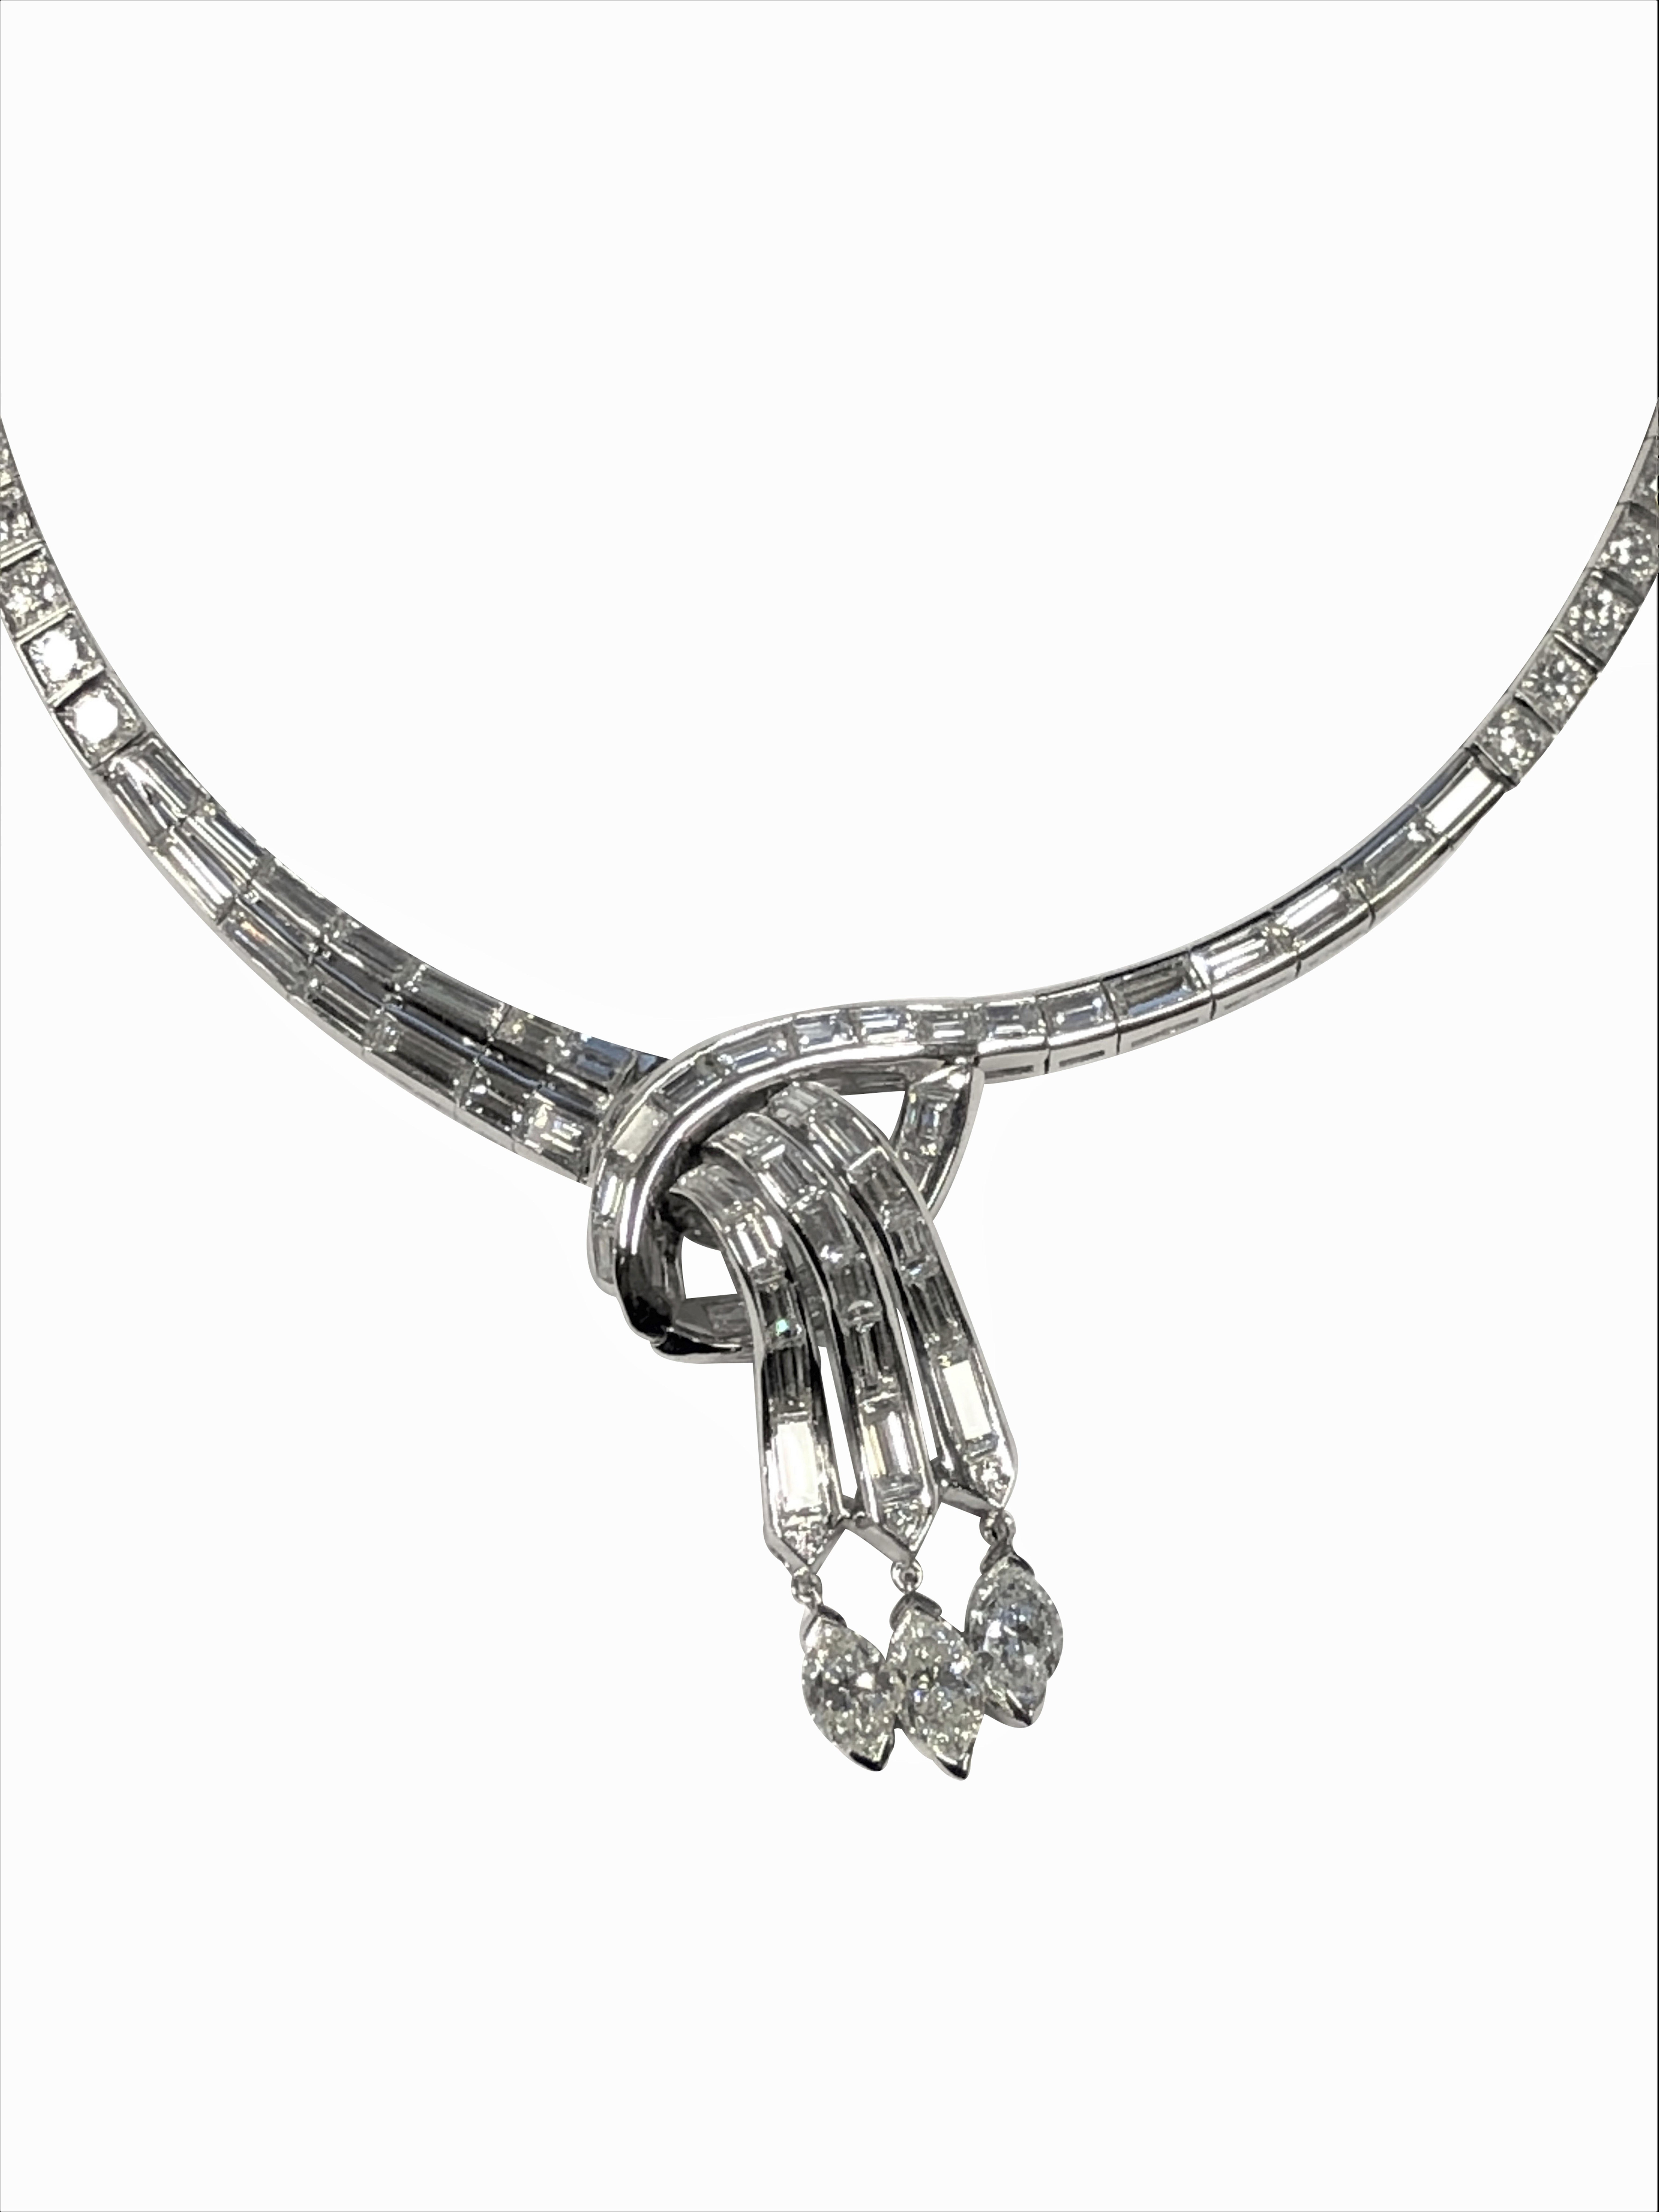 Circa 1940s Platinum and Diamond necklace, in a late Retro, Deco Design with individual linked settings for soft flexibility. Channel and Prong set Round Brilliant, Baguette and Marquise Diamonds totaling 16 Carats and all Grading as G to H in color